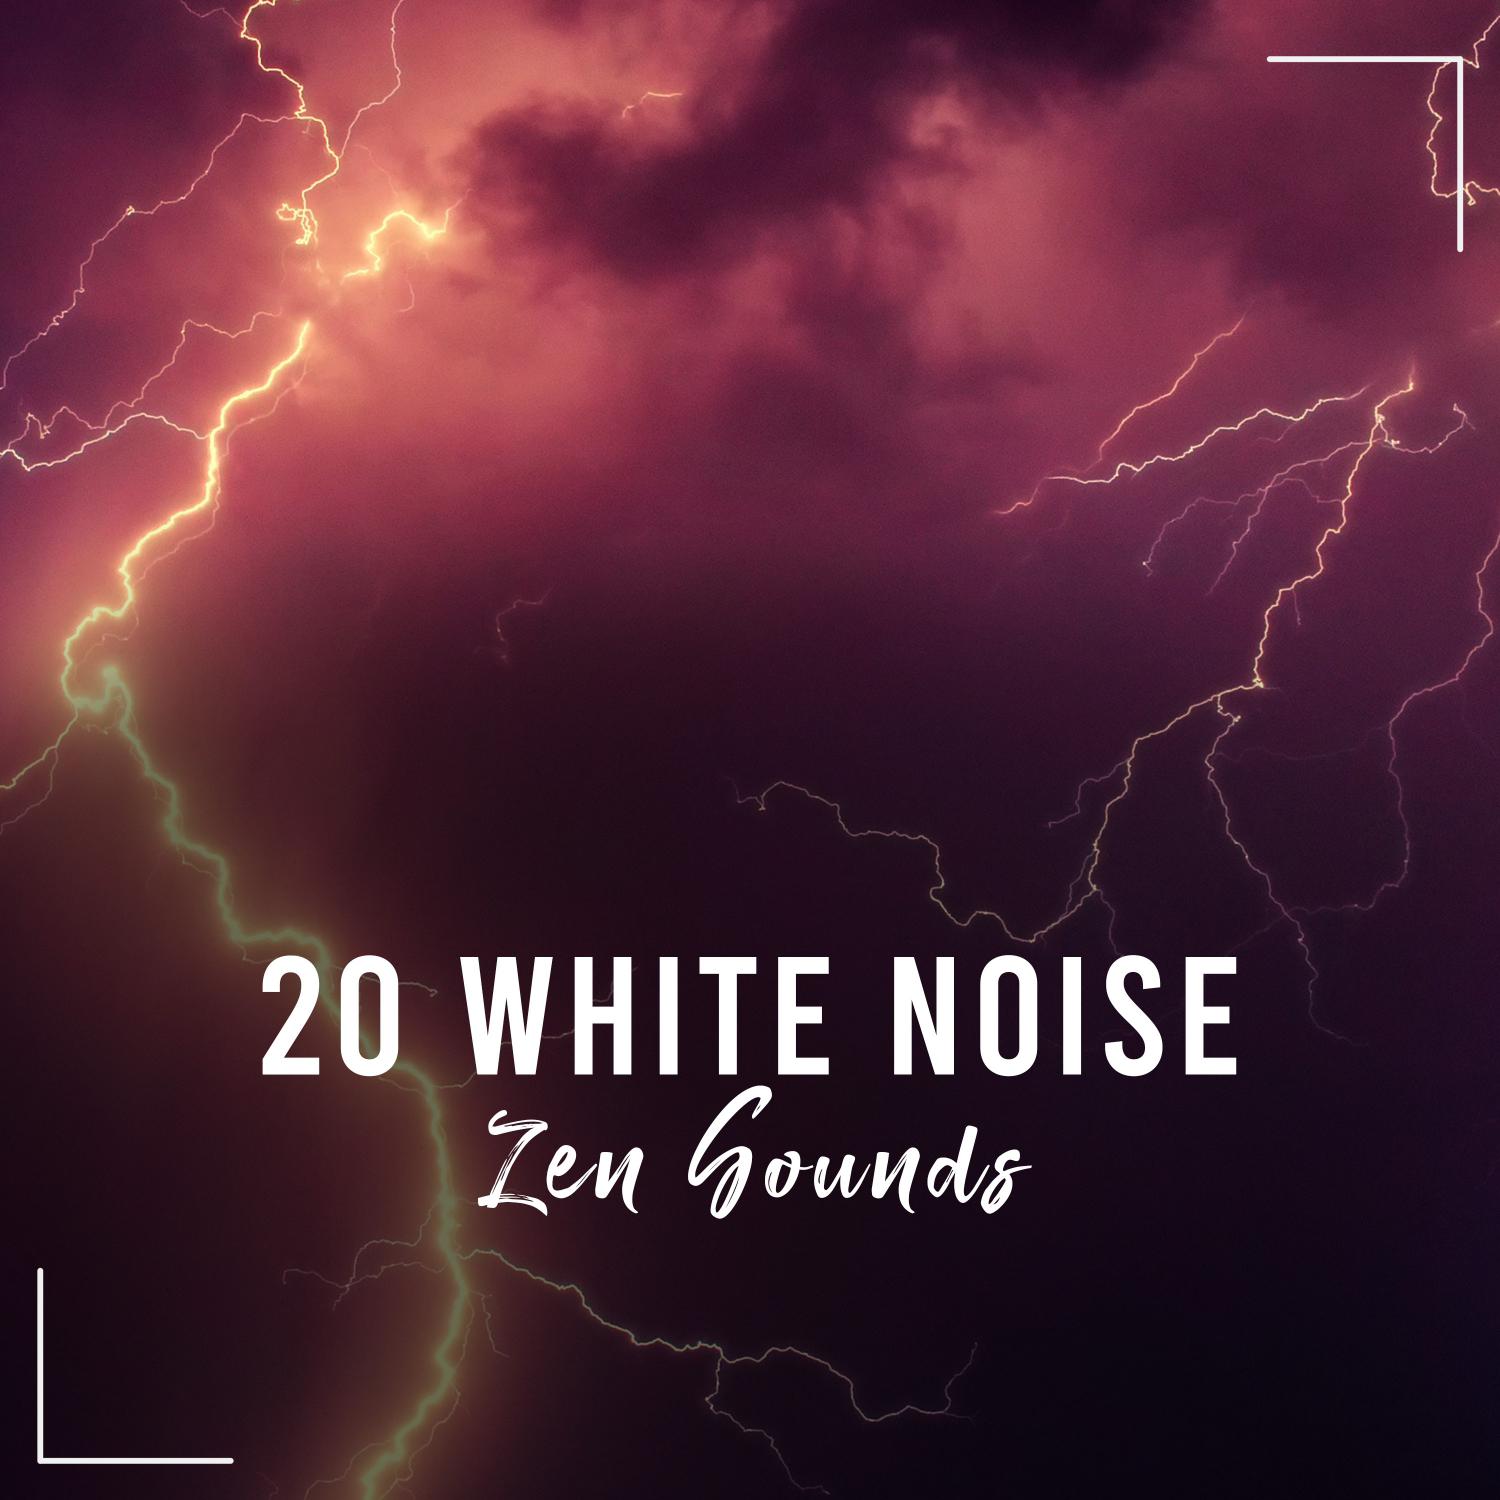 20 White Noise Zen Sounds - Calm the Mind, Reduce Stress and Find Peace